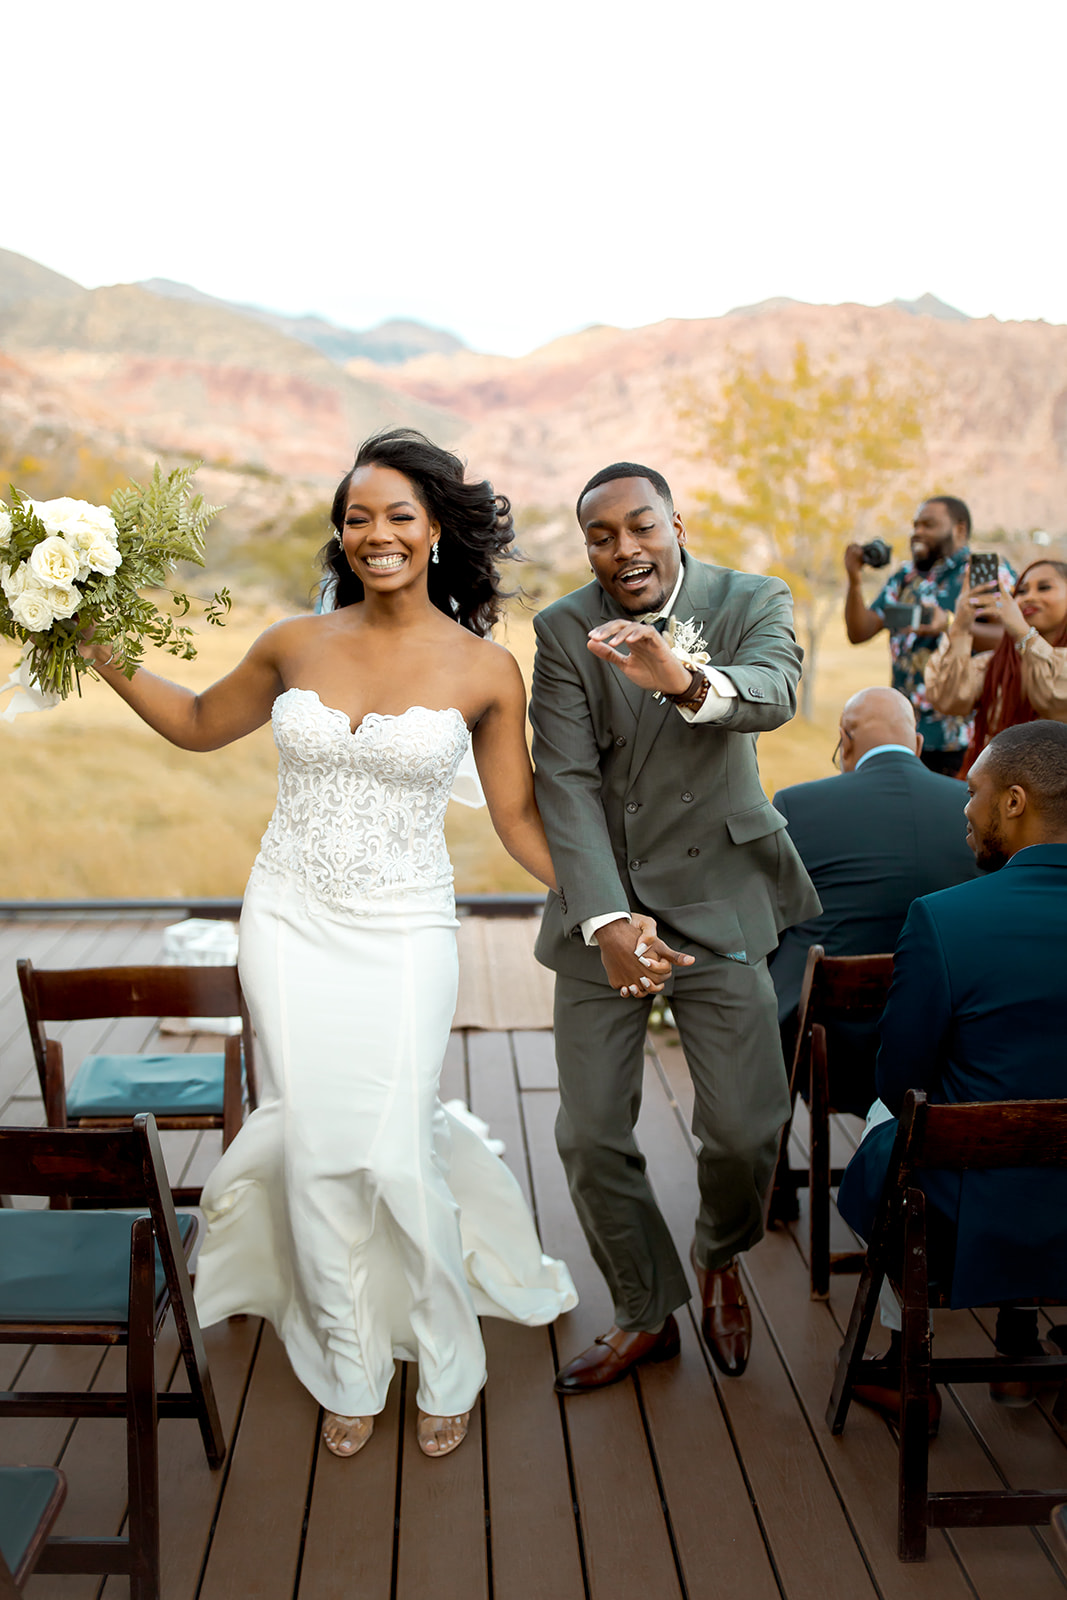 Newlyweds dancing down the aisle after getting eloped in Las Vegas 